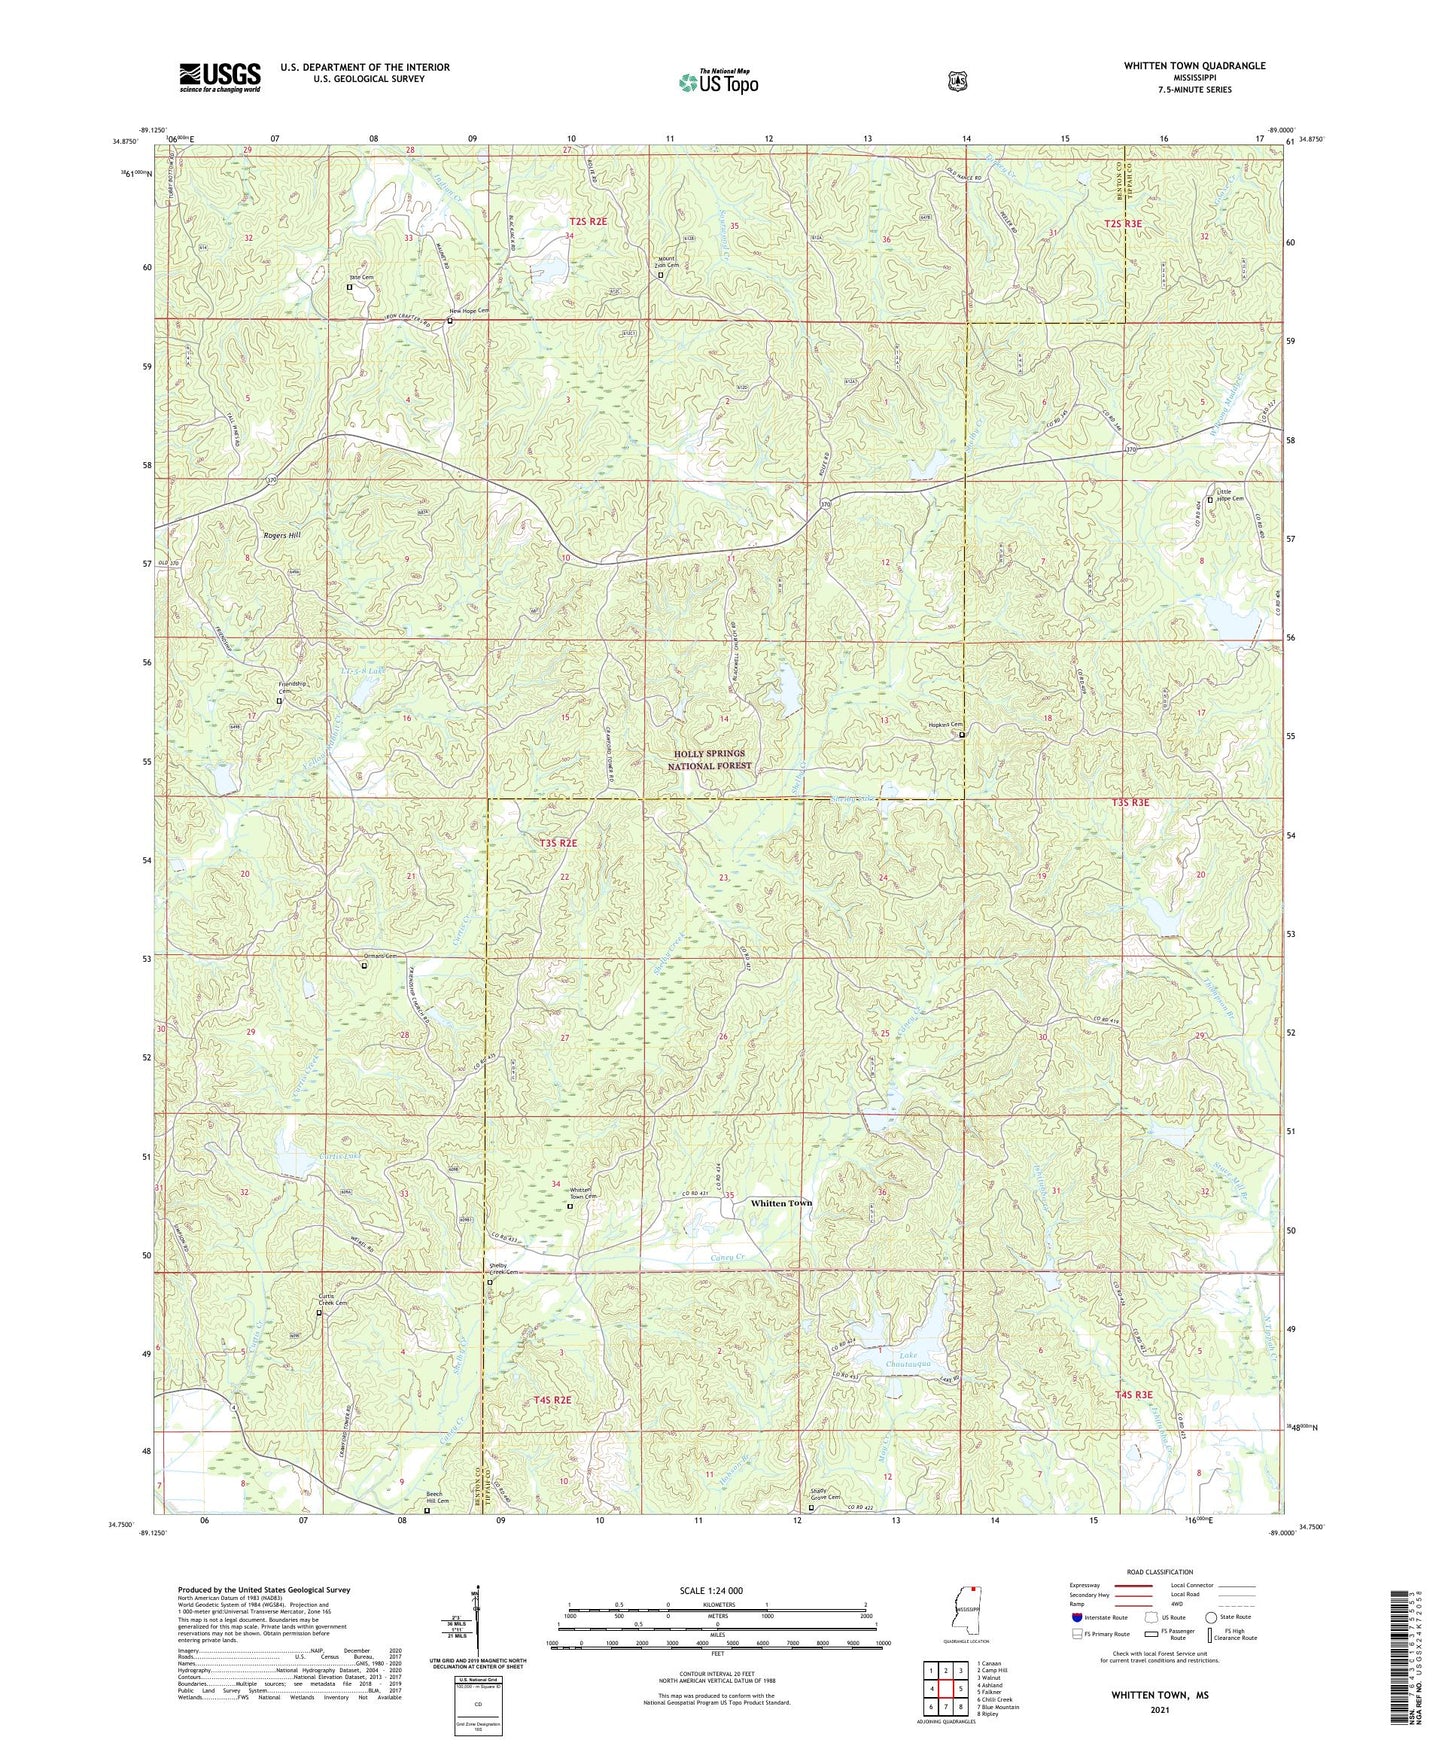 Whitten Town Mississippi US Topo Map Image